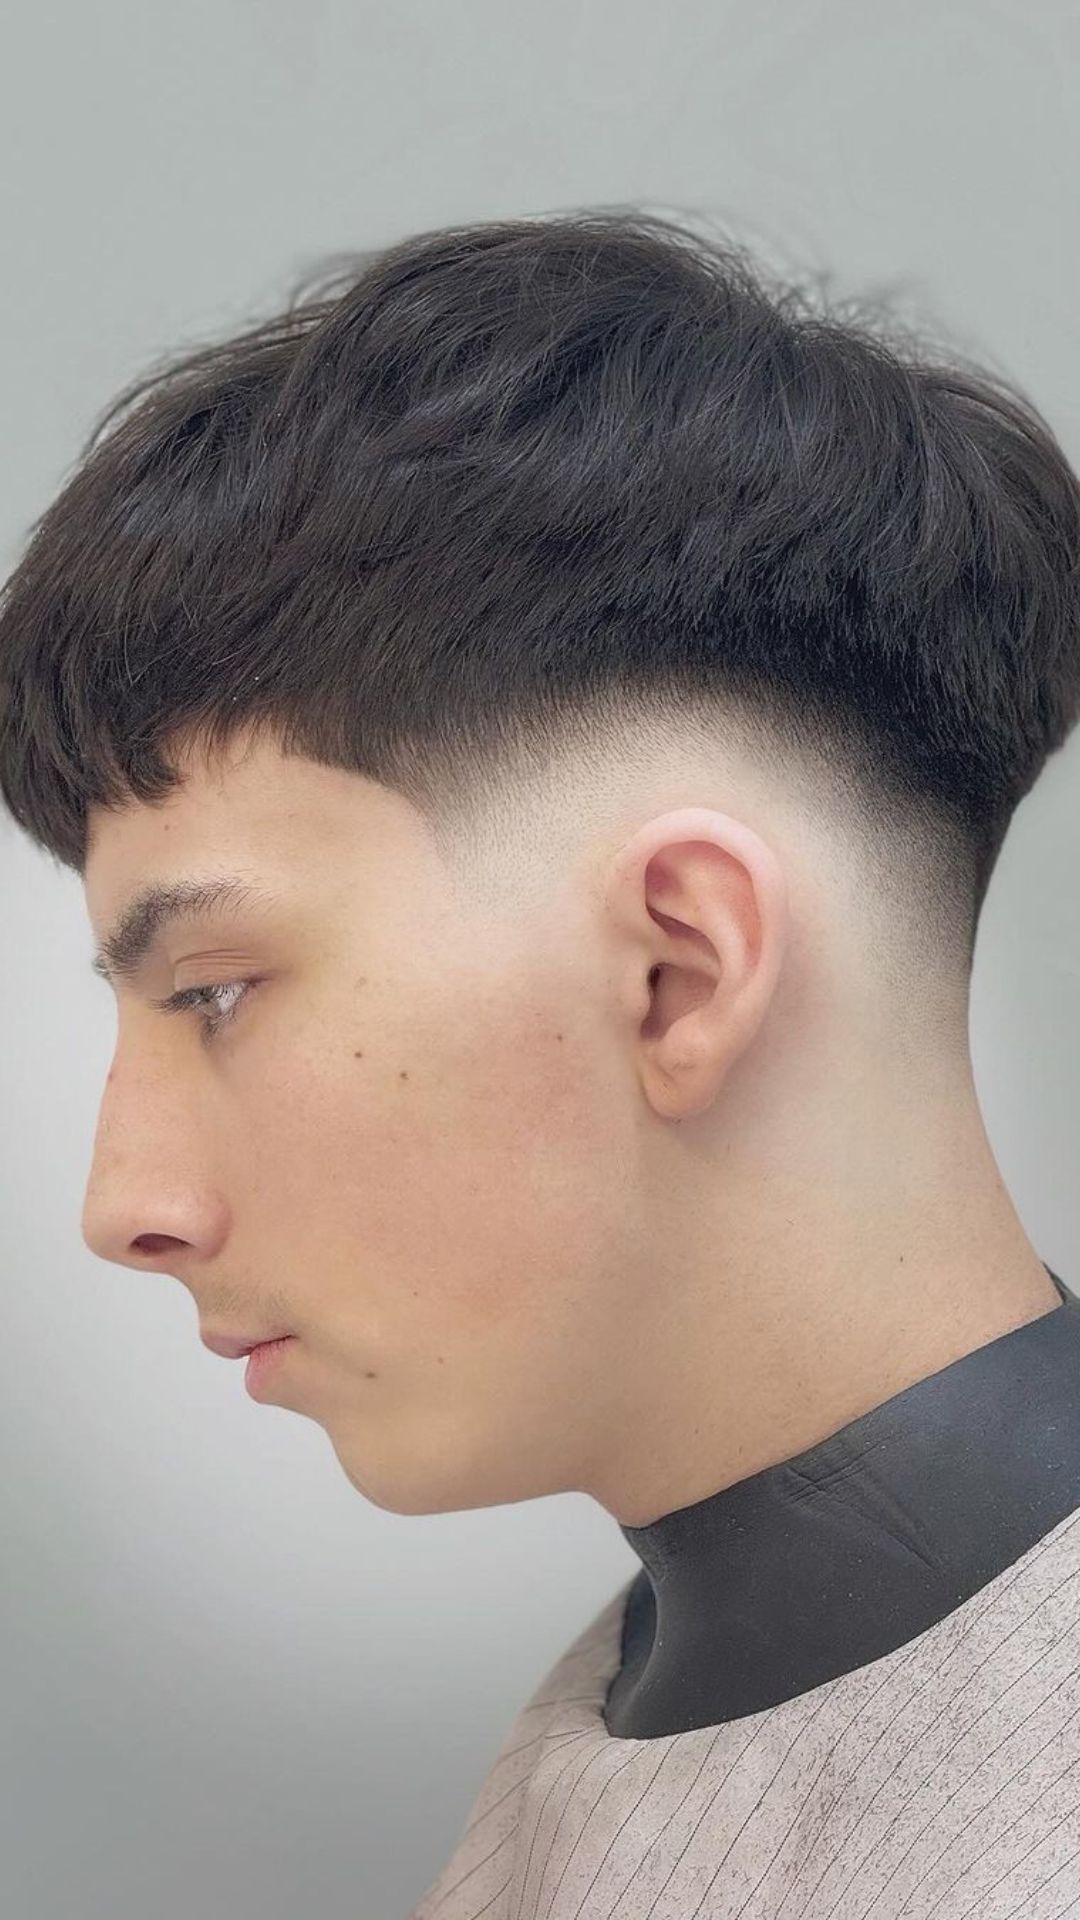 A man with a low skin fade and textured crop haircut.